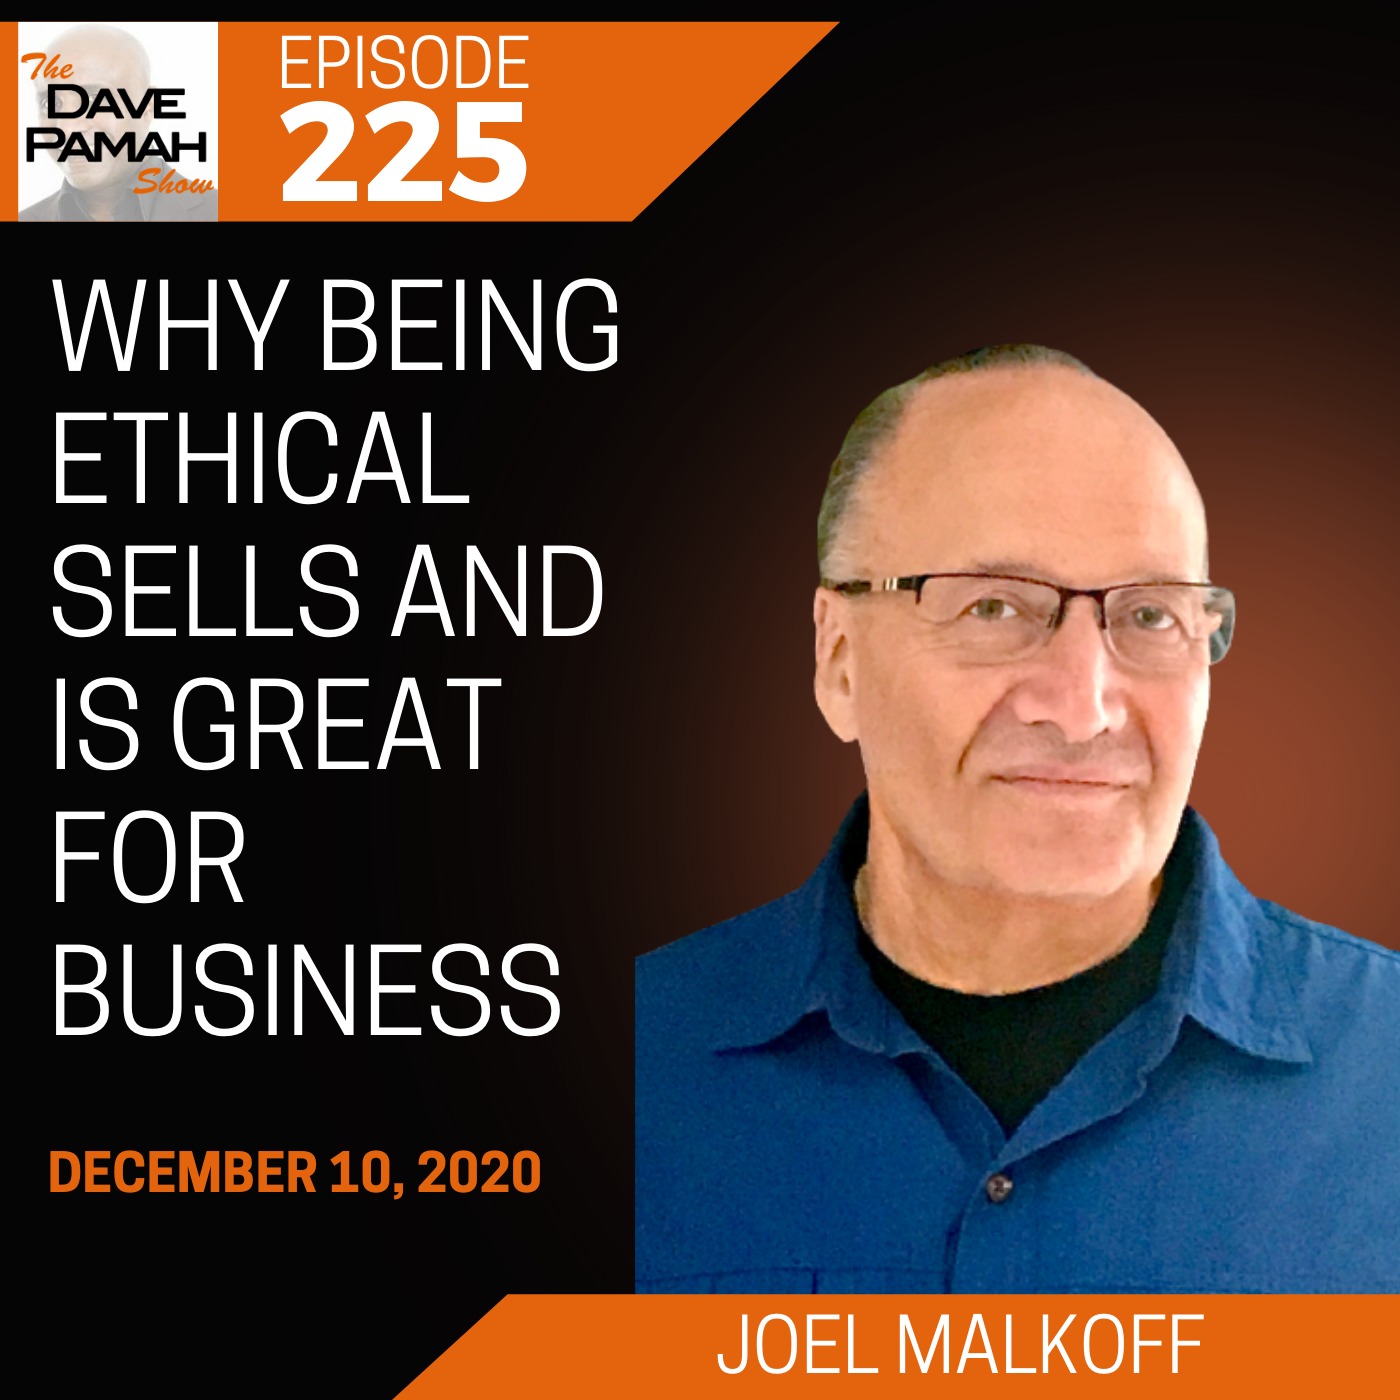 Why Being Ethical Sells and Is Great for Business with Joel Malkoff